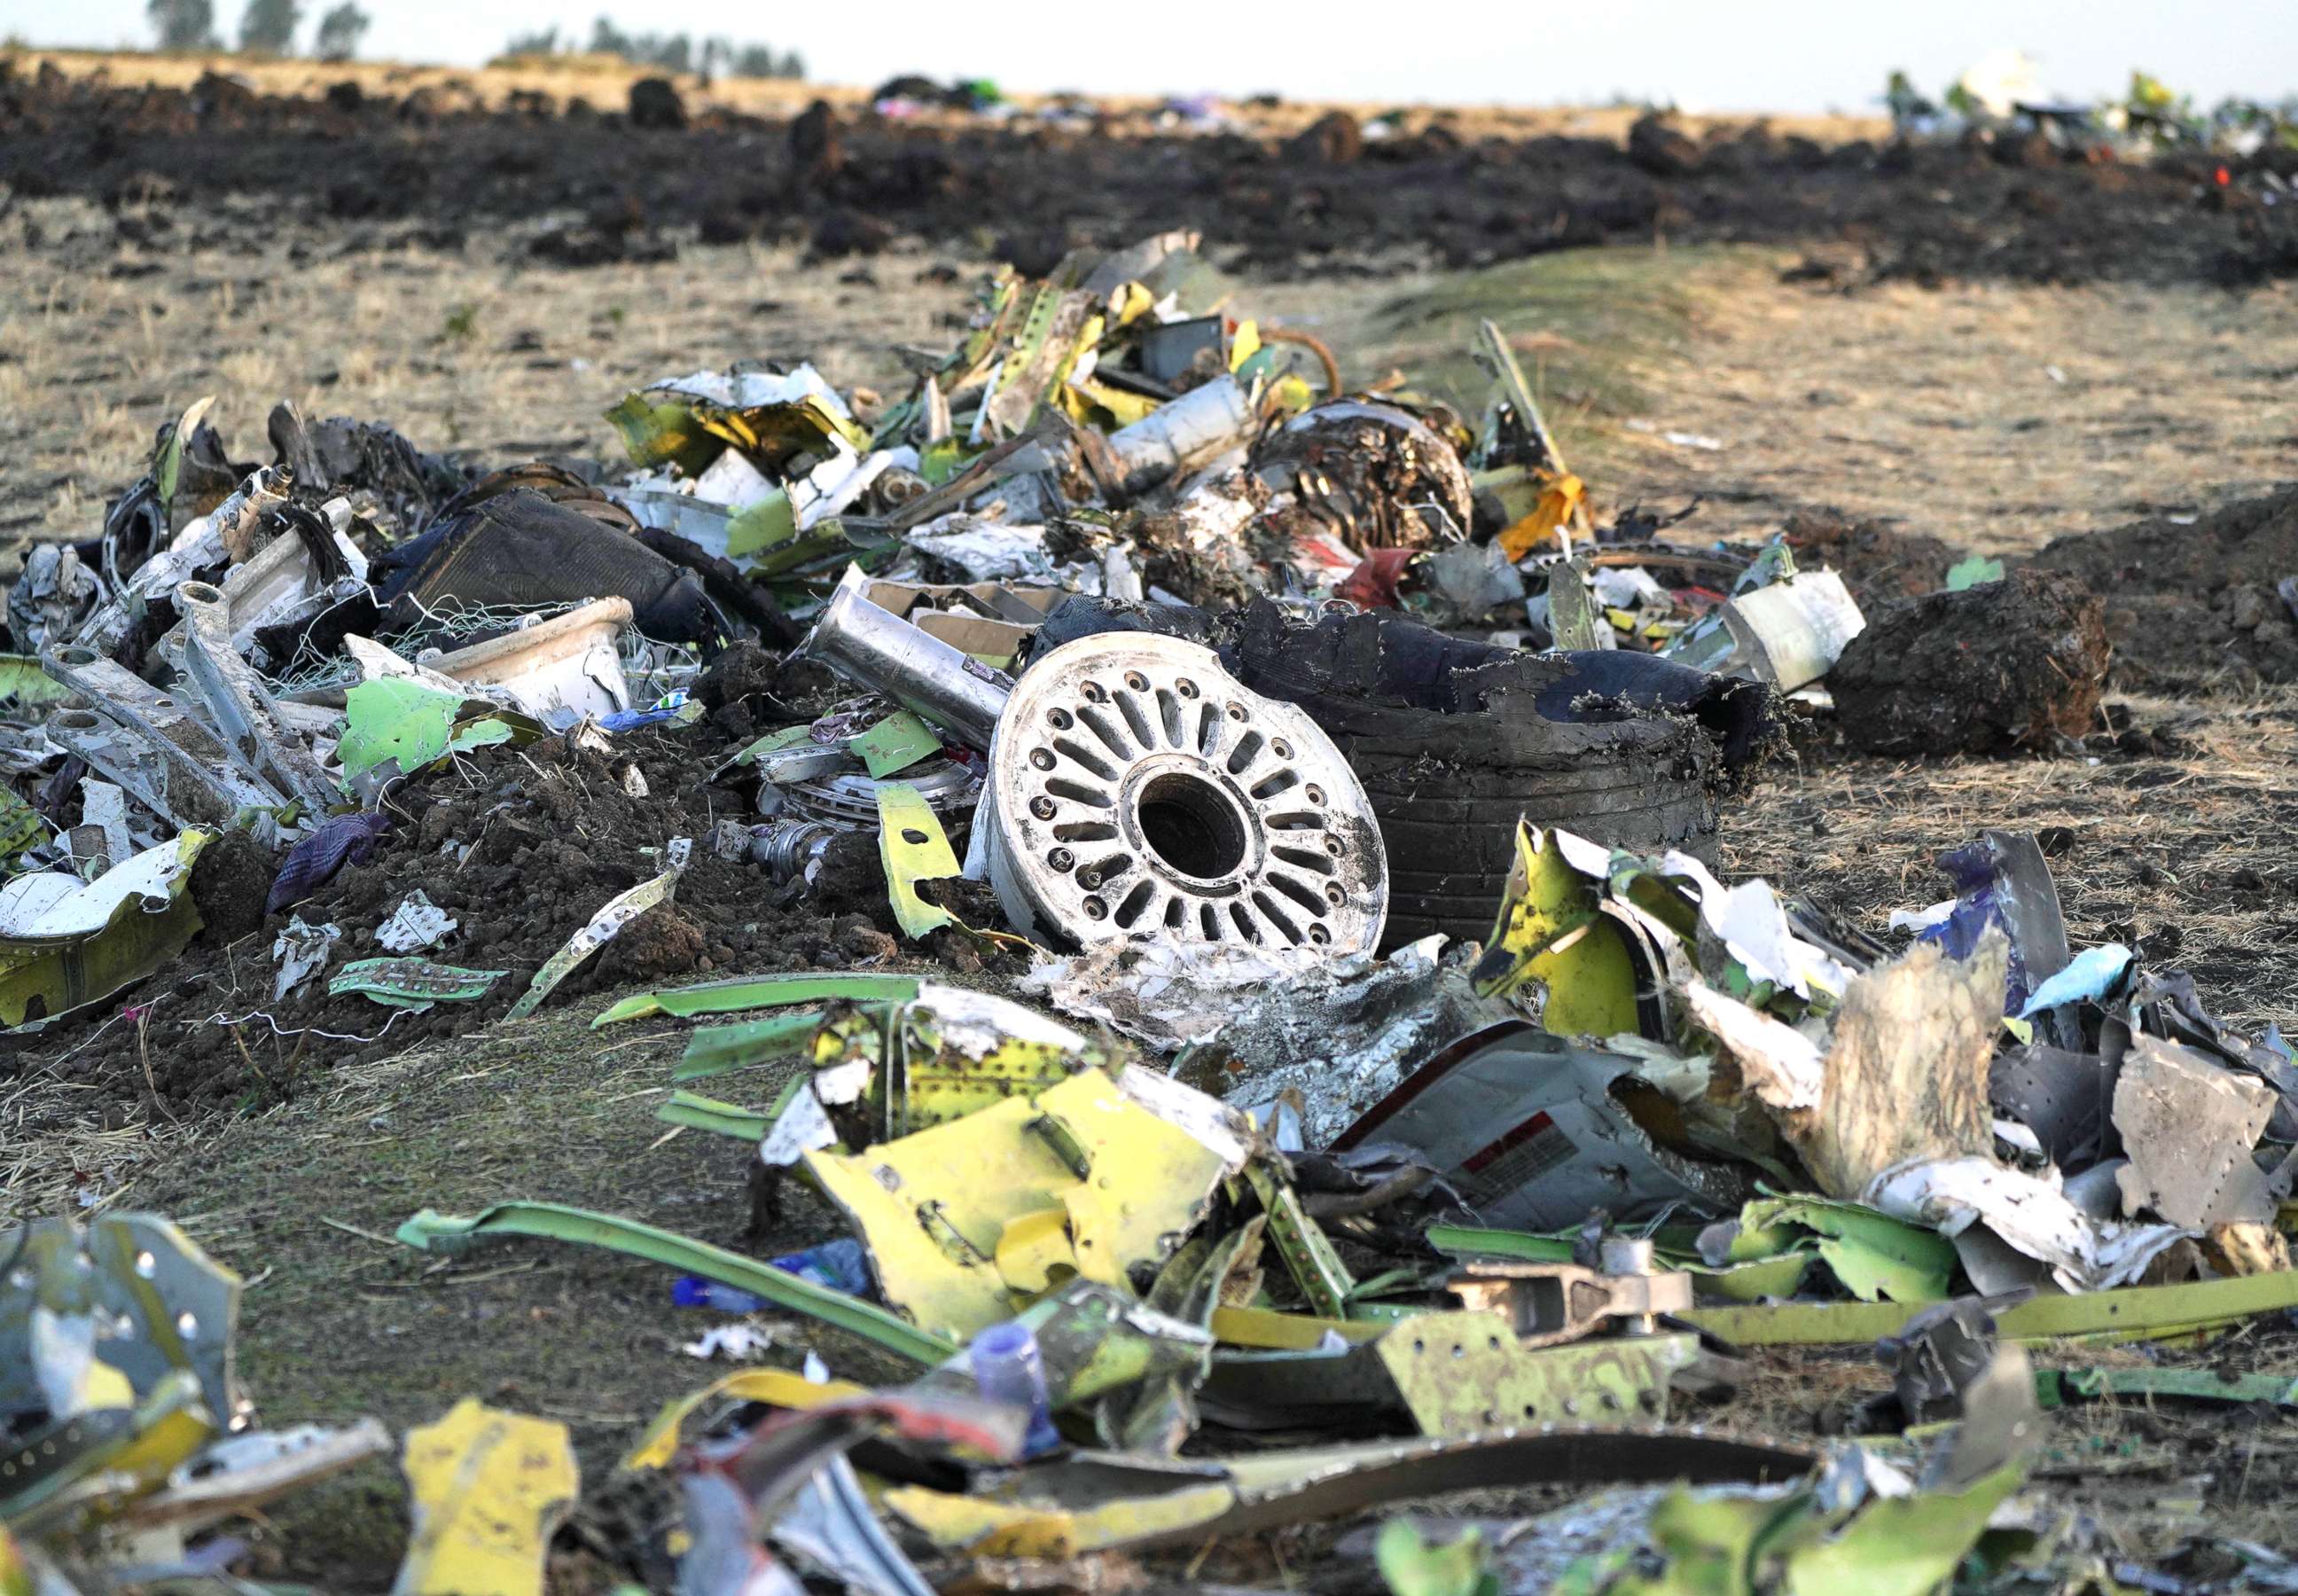 PHOTO: Parts of the landing gear lay in a pile after being gathered by workers during the continuing recovery efforts at the crash site of Ethiopian Airlines flight ET302 on March 11, 2019, in Bishoftu, Ethiopia.